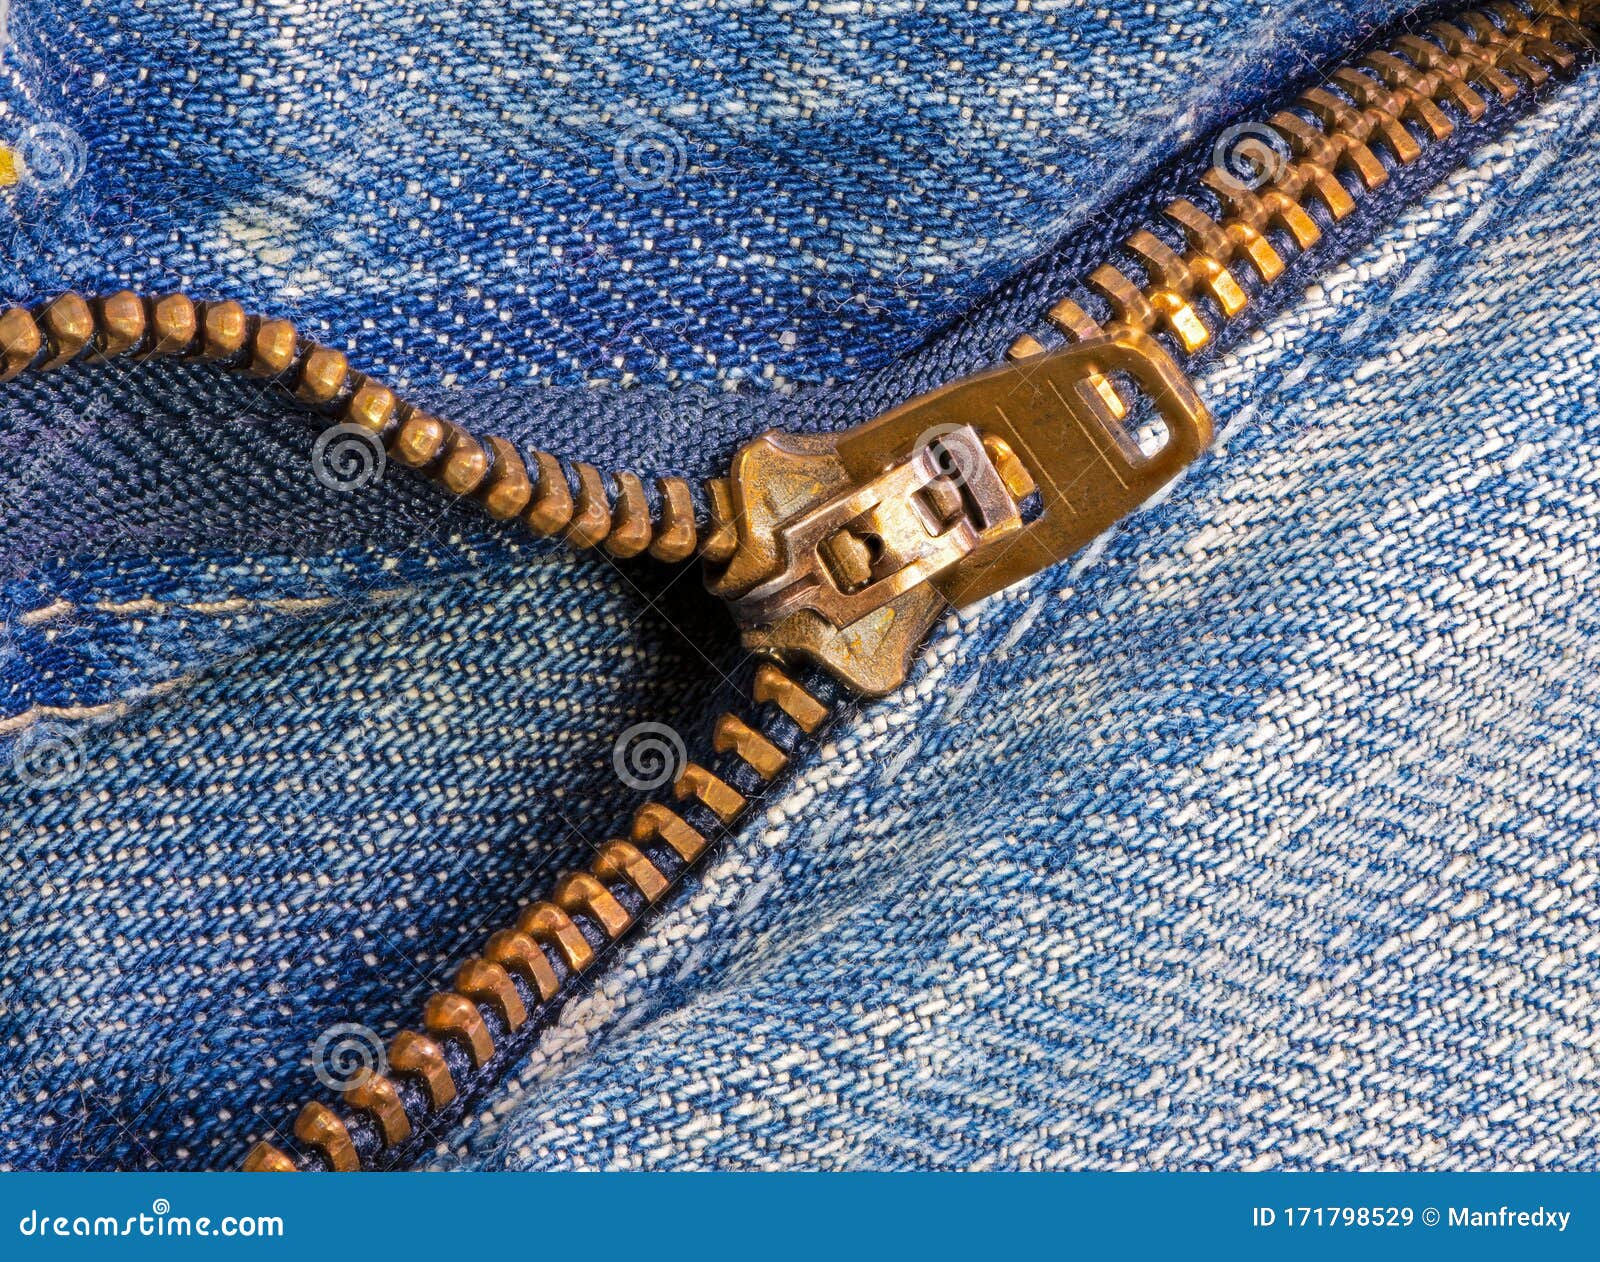 Open Zipper of a Worn Out Jeans Stock Image - Image of pants, textile ...